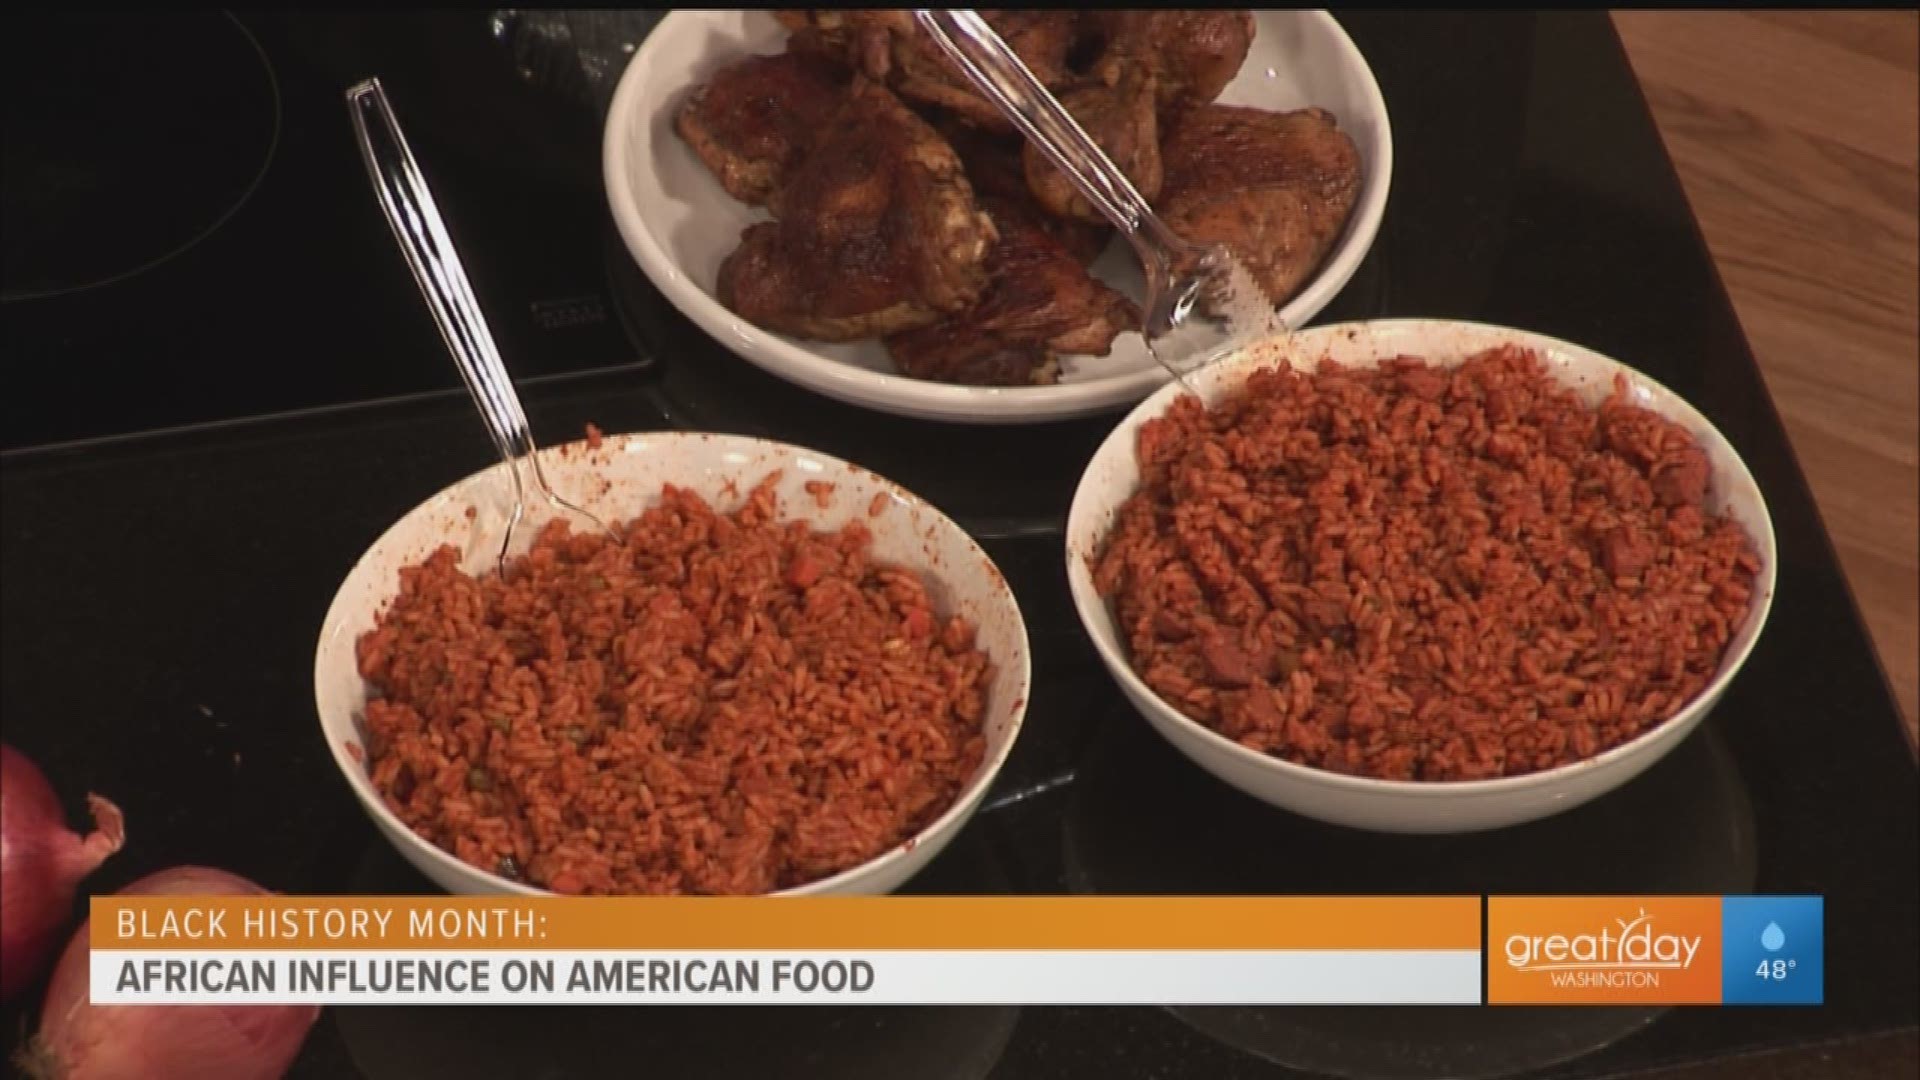 For this Black History month, Jay and Jayson Cameron discuss the role that African cuisine played on influencing many American foods.